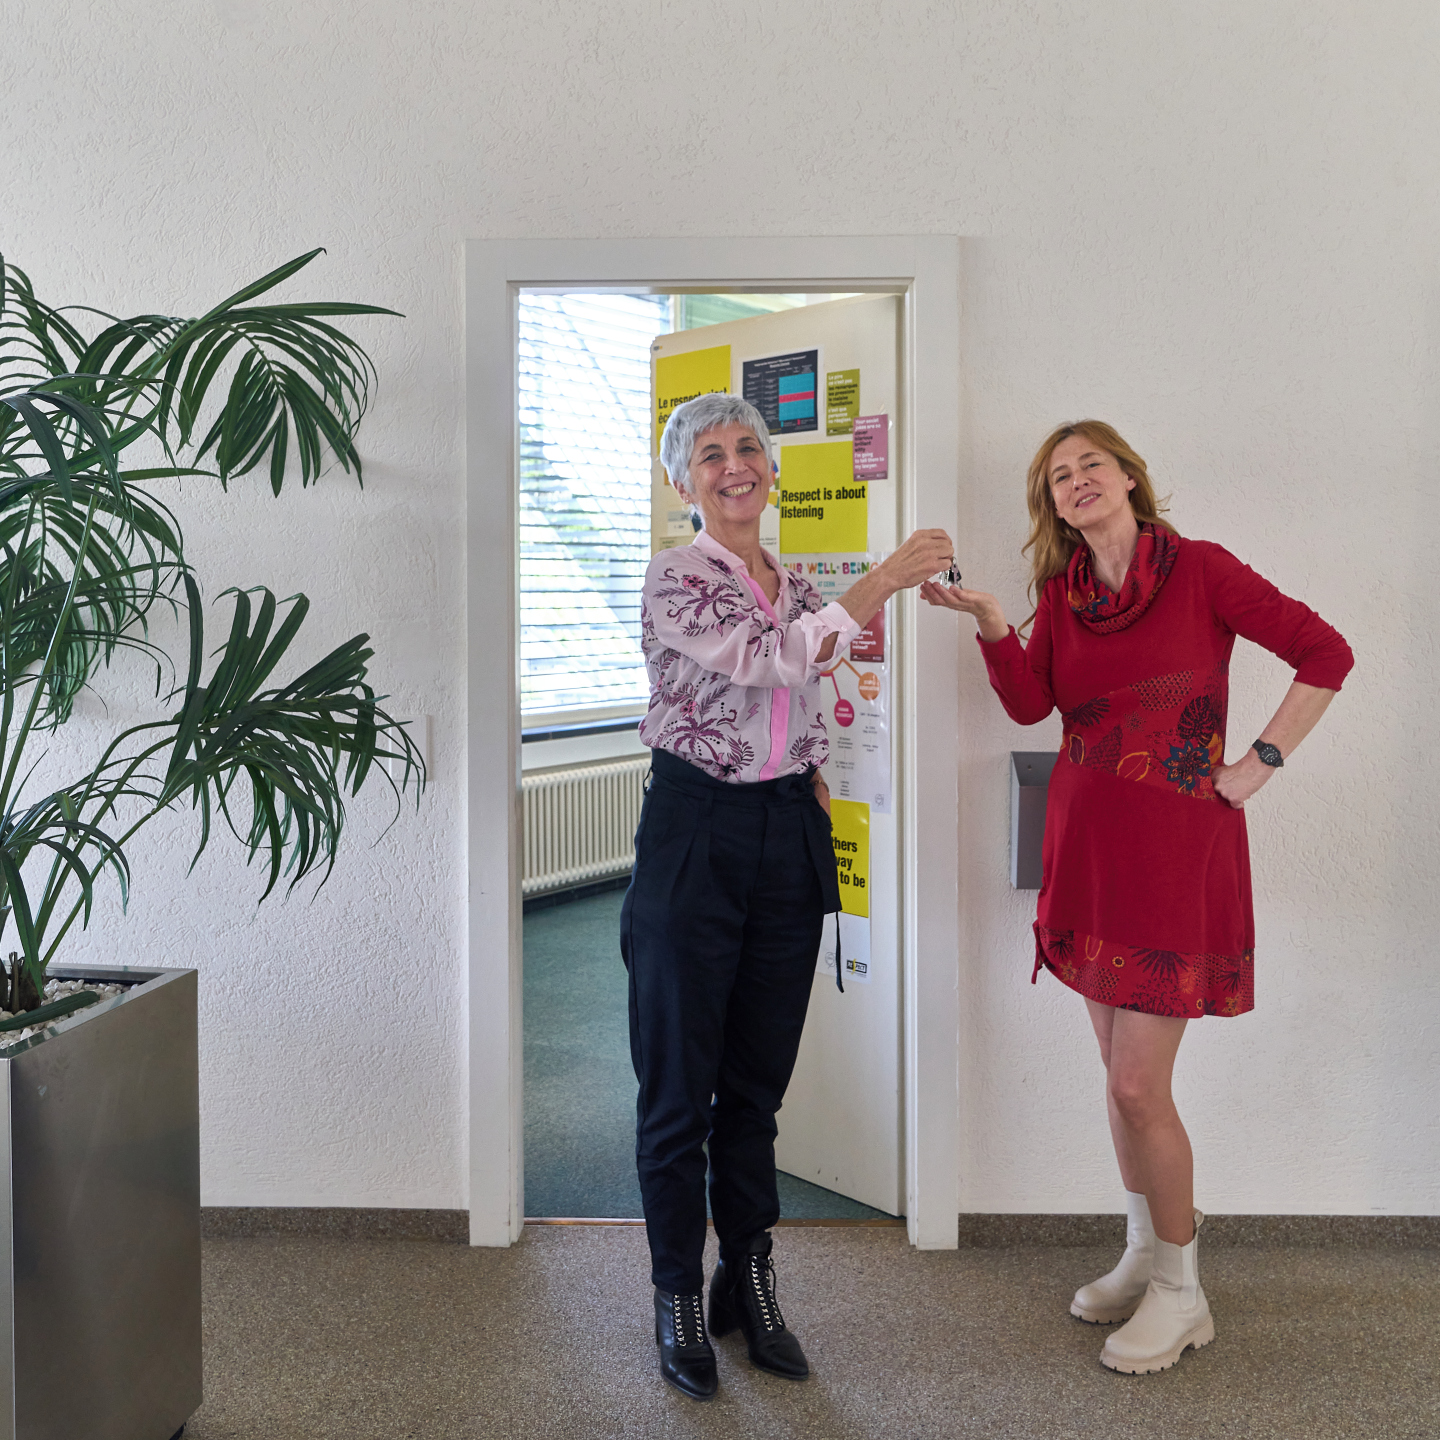 Laure Esteveny hands the keys to the Ombud’s office to Marie-Luce Falipou in front of the office's door.